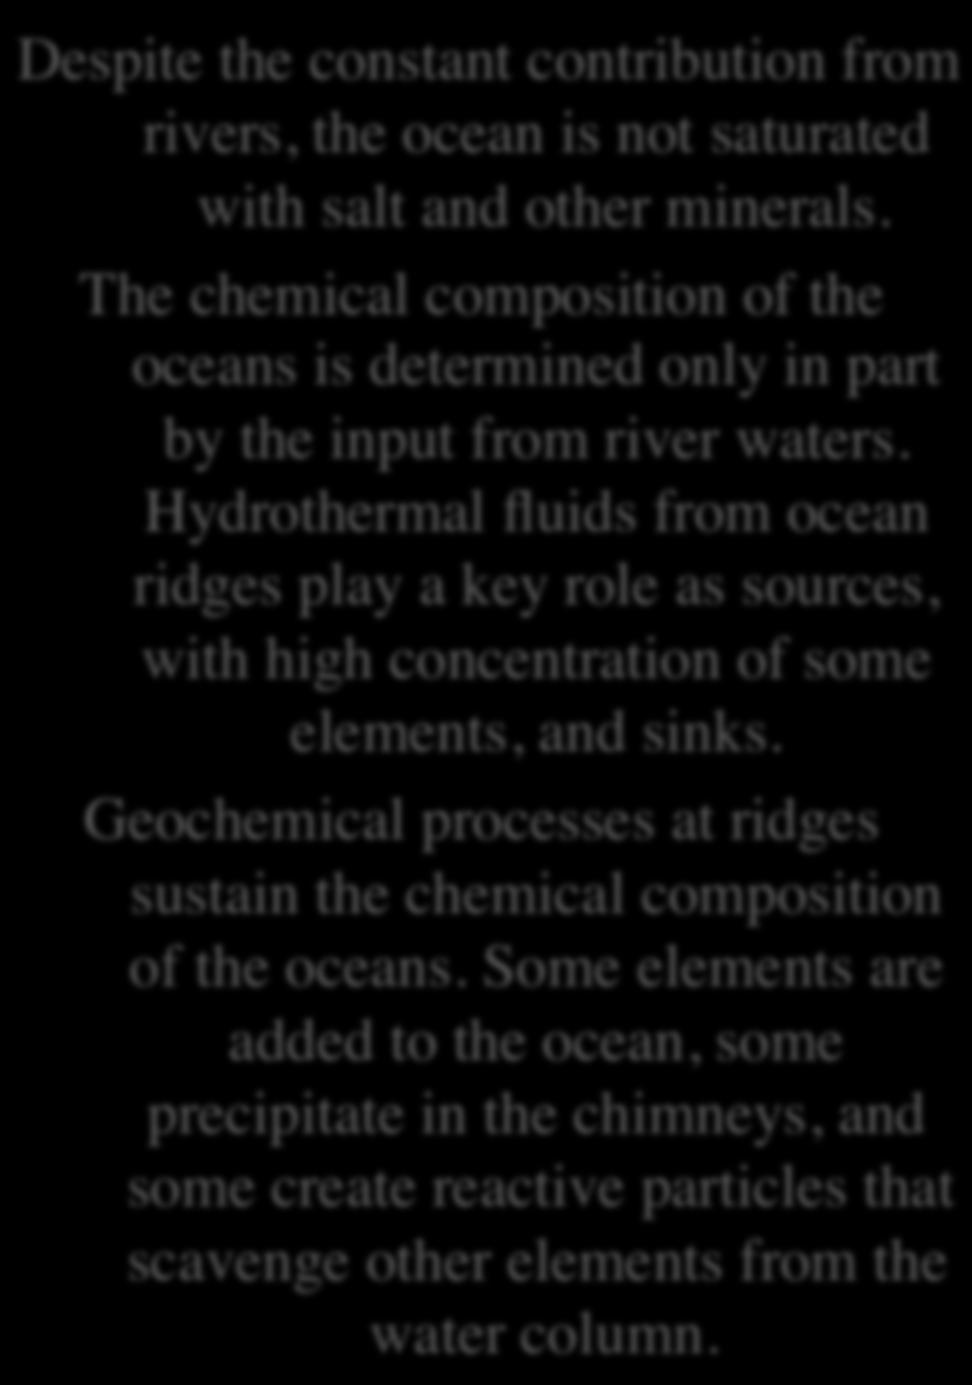 Hydrothermal fluids from ocean ridges play a key role as sources, with high concentration of some elements, and sinks.